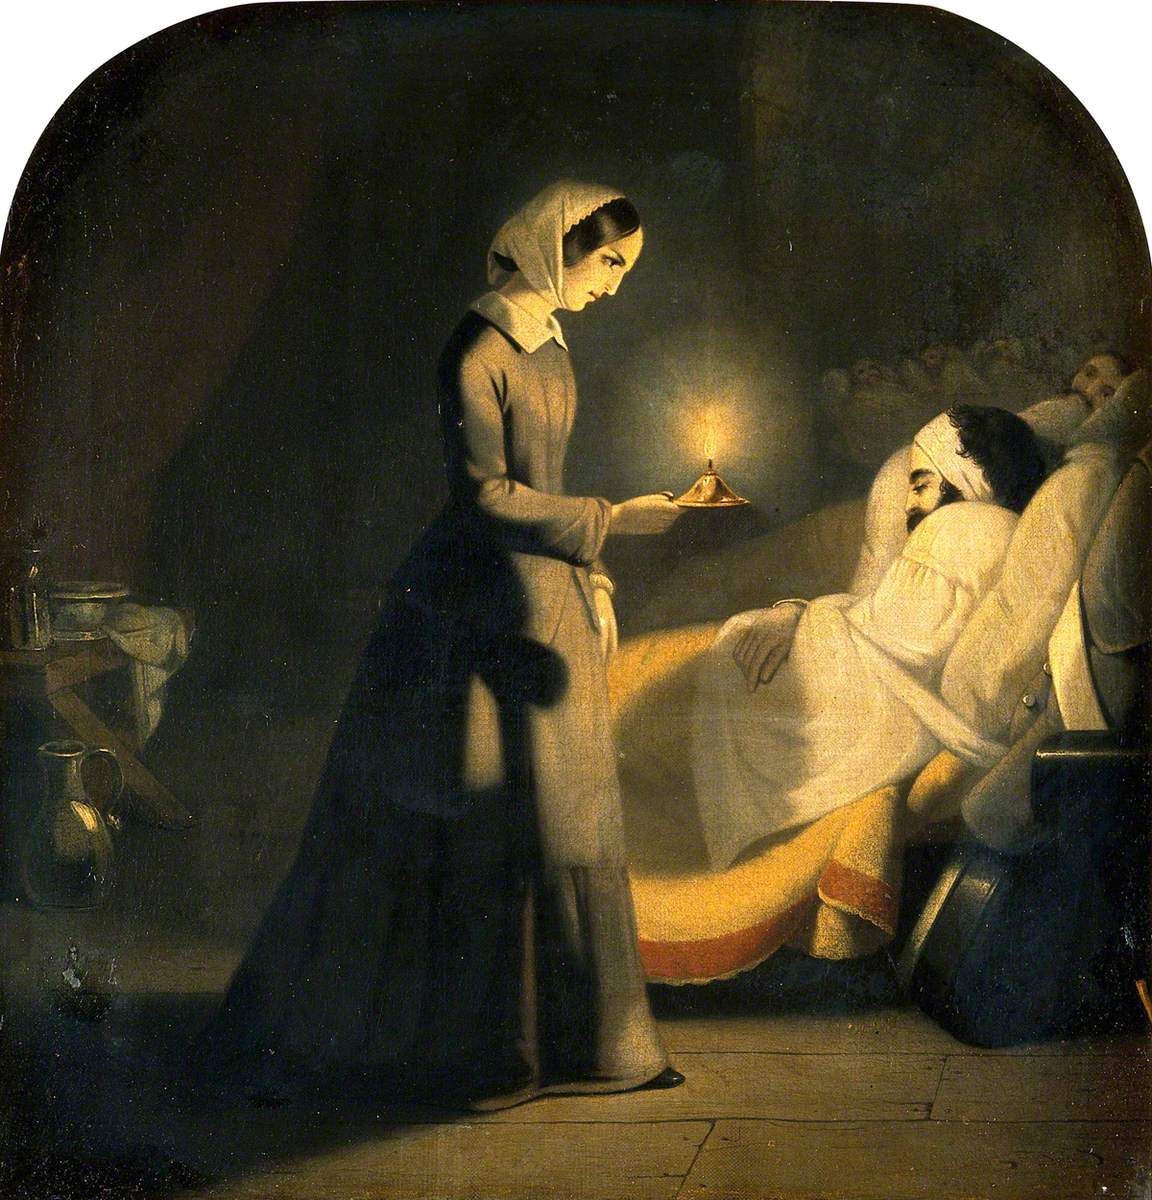 Florence Nightingale as the Lady with the Lamp | Art UK